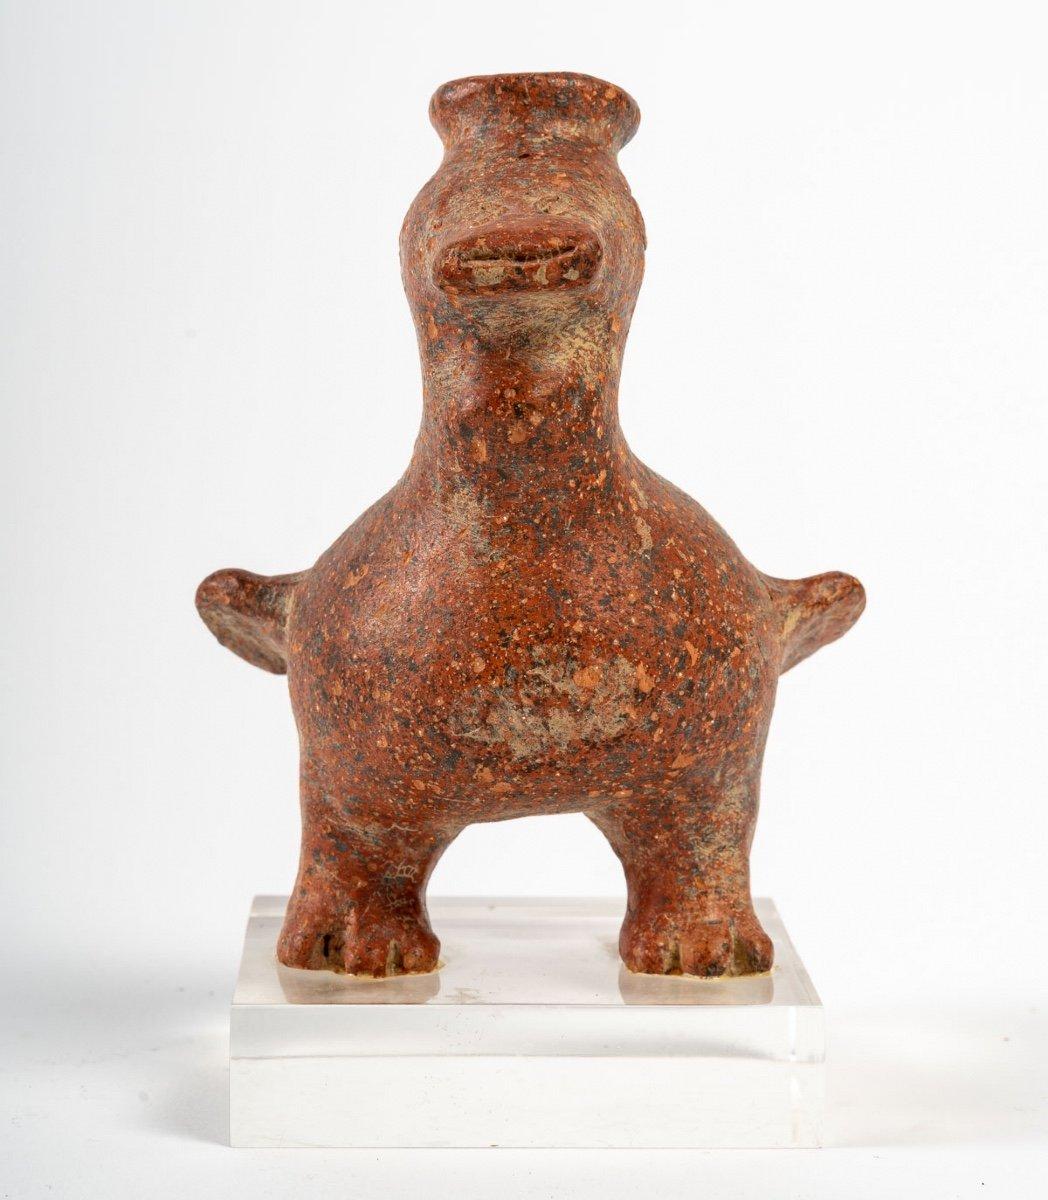 Very old sculpture, animal or zoomorphic, pre-Columbian, in pottery from western Mexico, very probably from Colima, perhaps from Jalisco or even Nayarit.
Beautiful red clay patina with a burnished brown/red slip on the surface. Beautifully sculpted